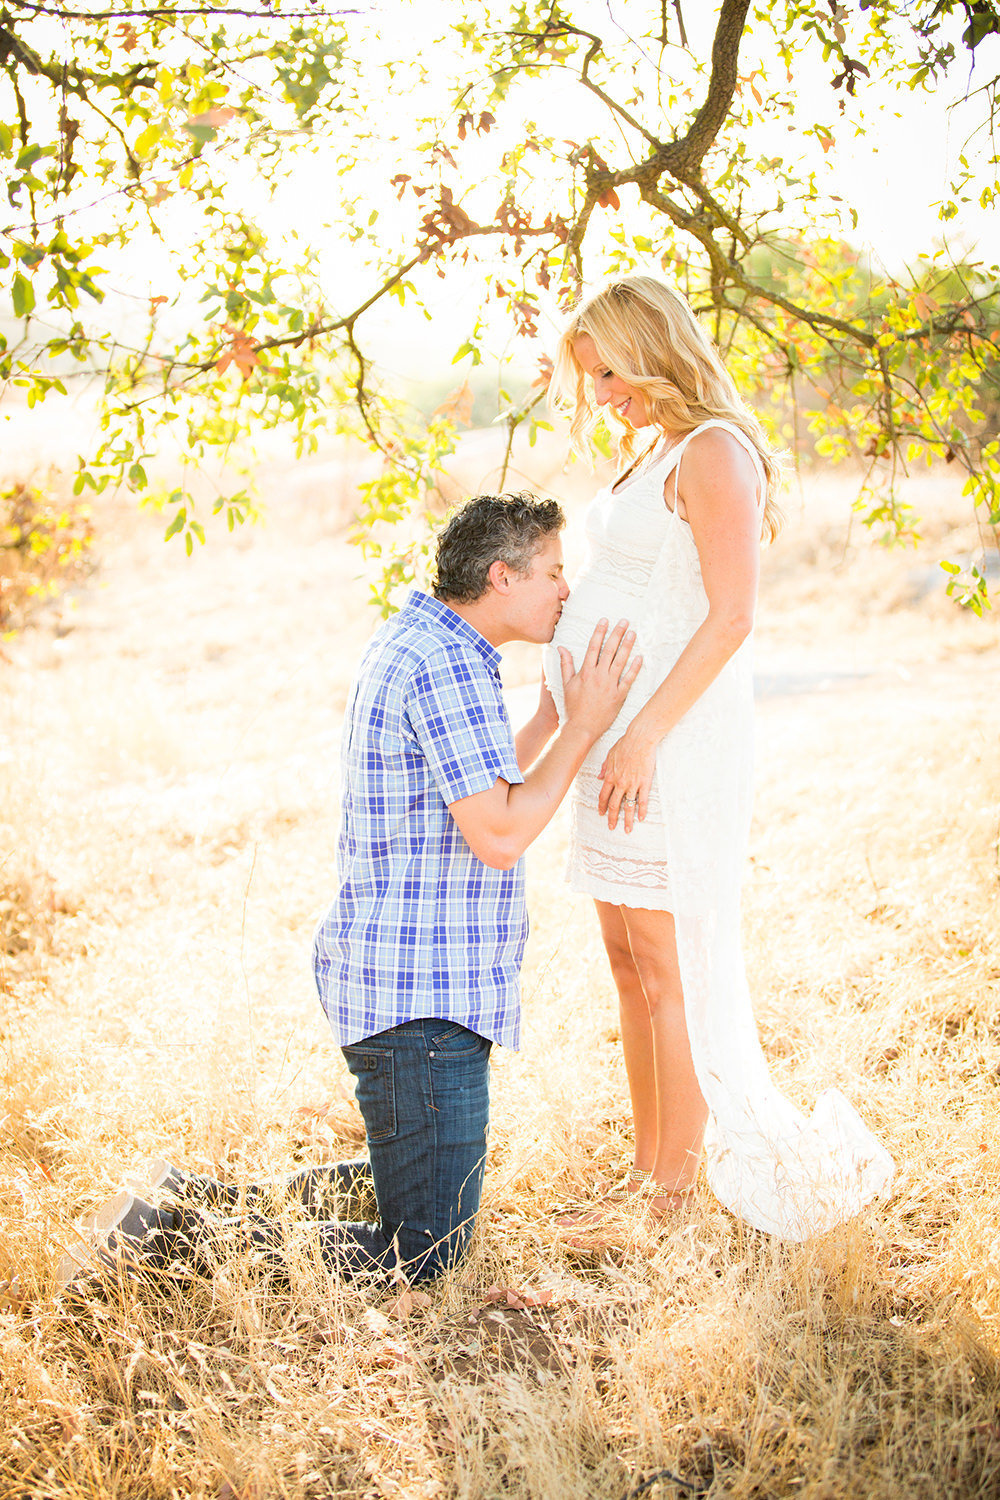 Classic kissing belly for this Maternity Session in San Diego.